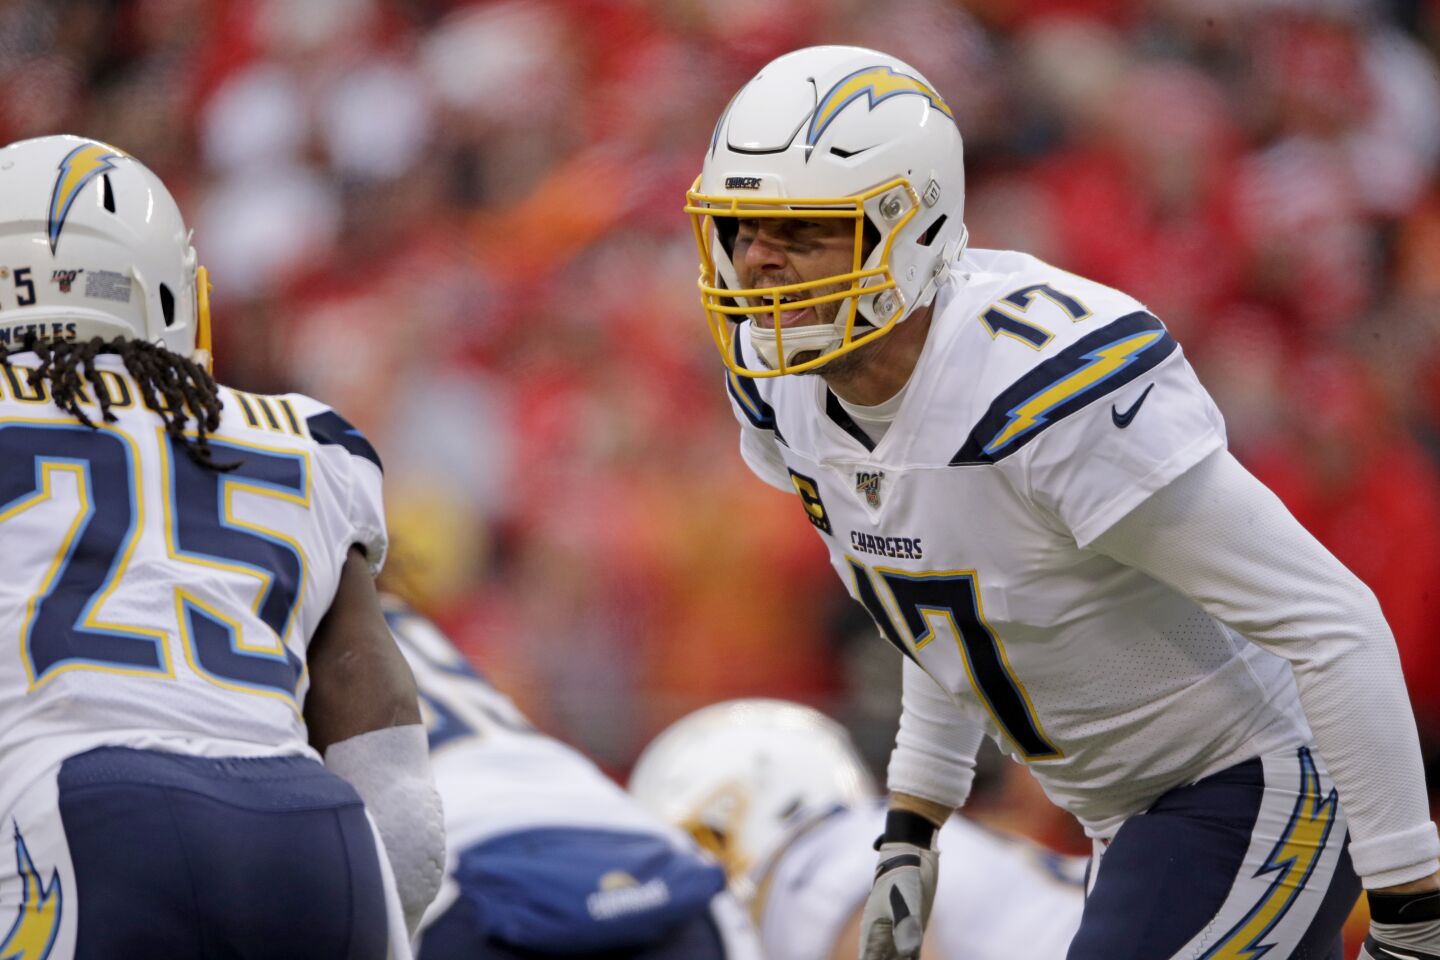 Chargers quarterback Philip Rivers (17) calls out instructions at the line during a game against the Chiefs on Dec. 29.